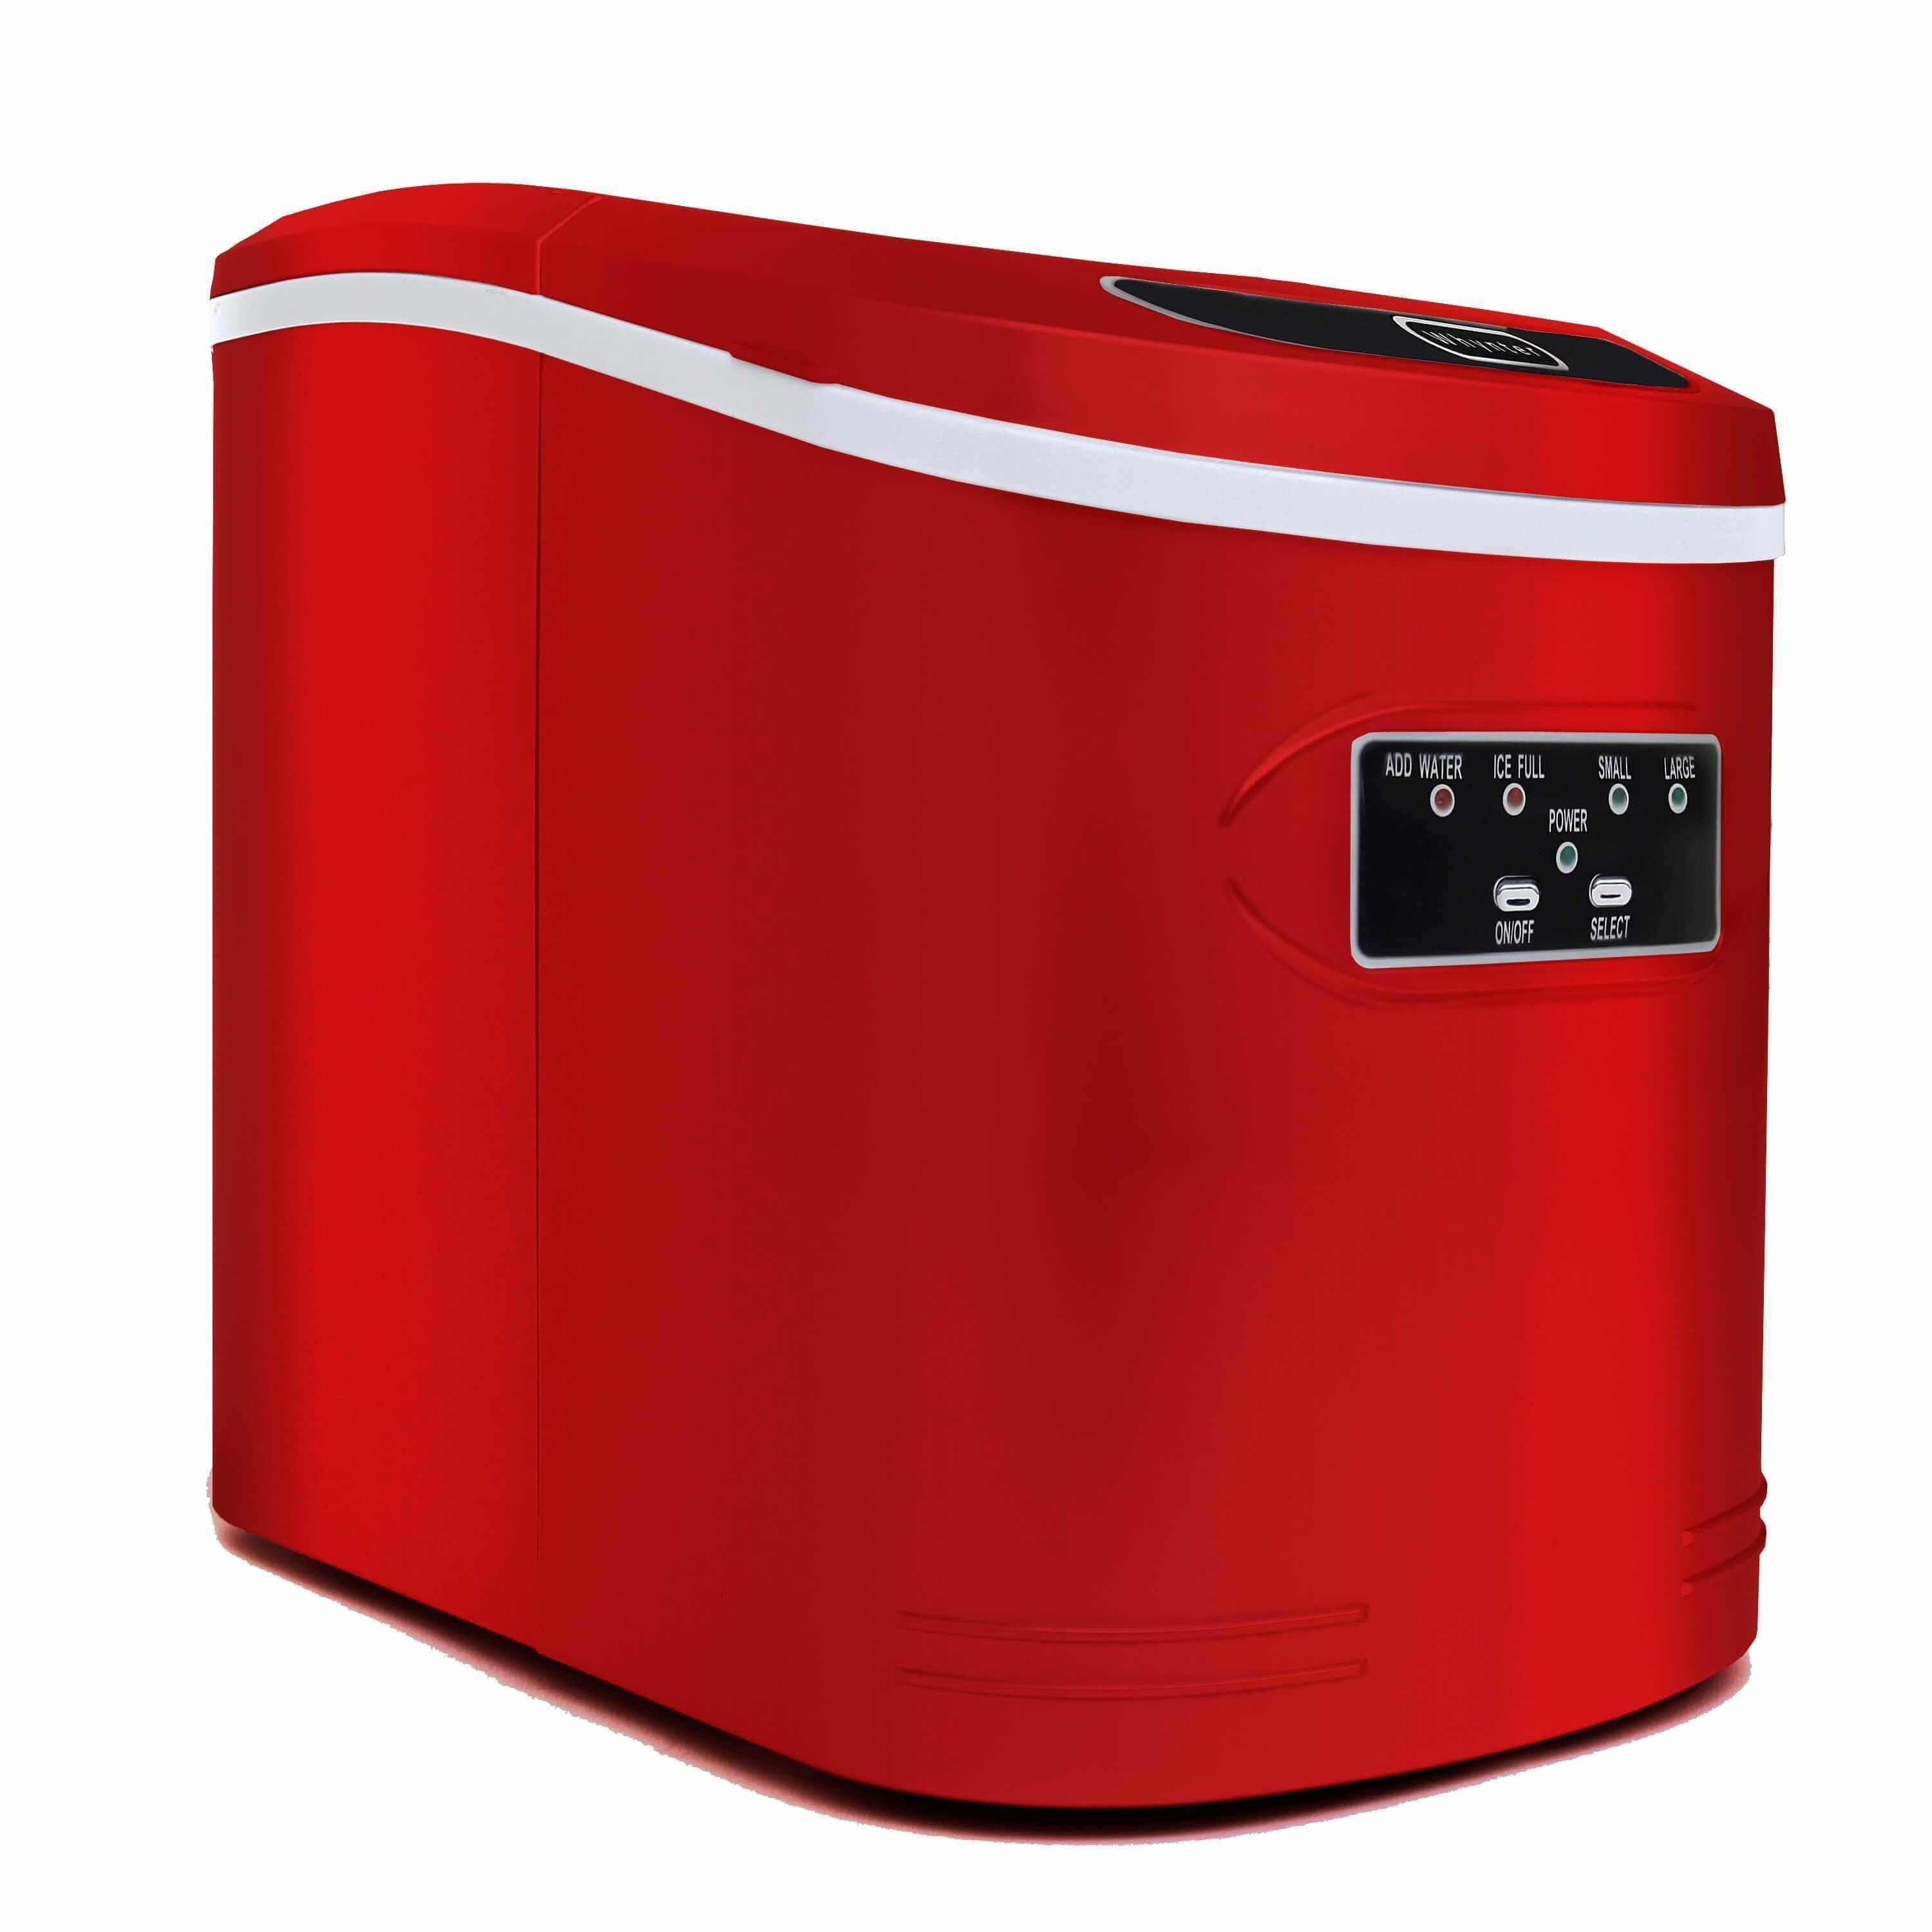 Whynter Compact Portable Ice Maker 27 lb capacity Red IMC-270MR Wine Coolers Empire